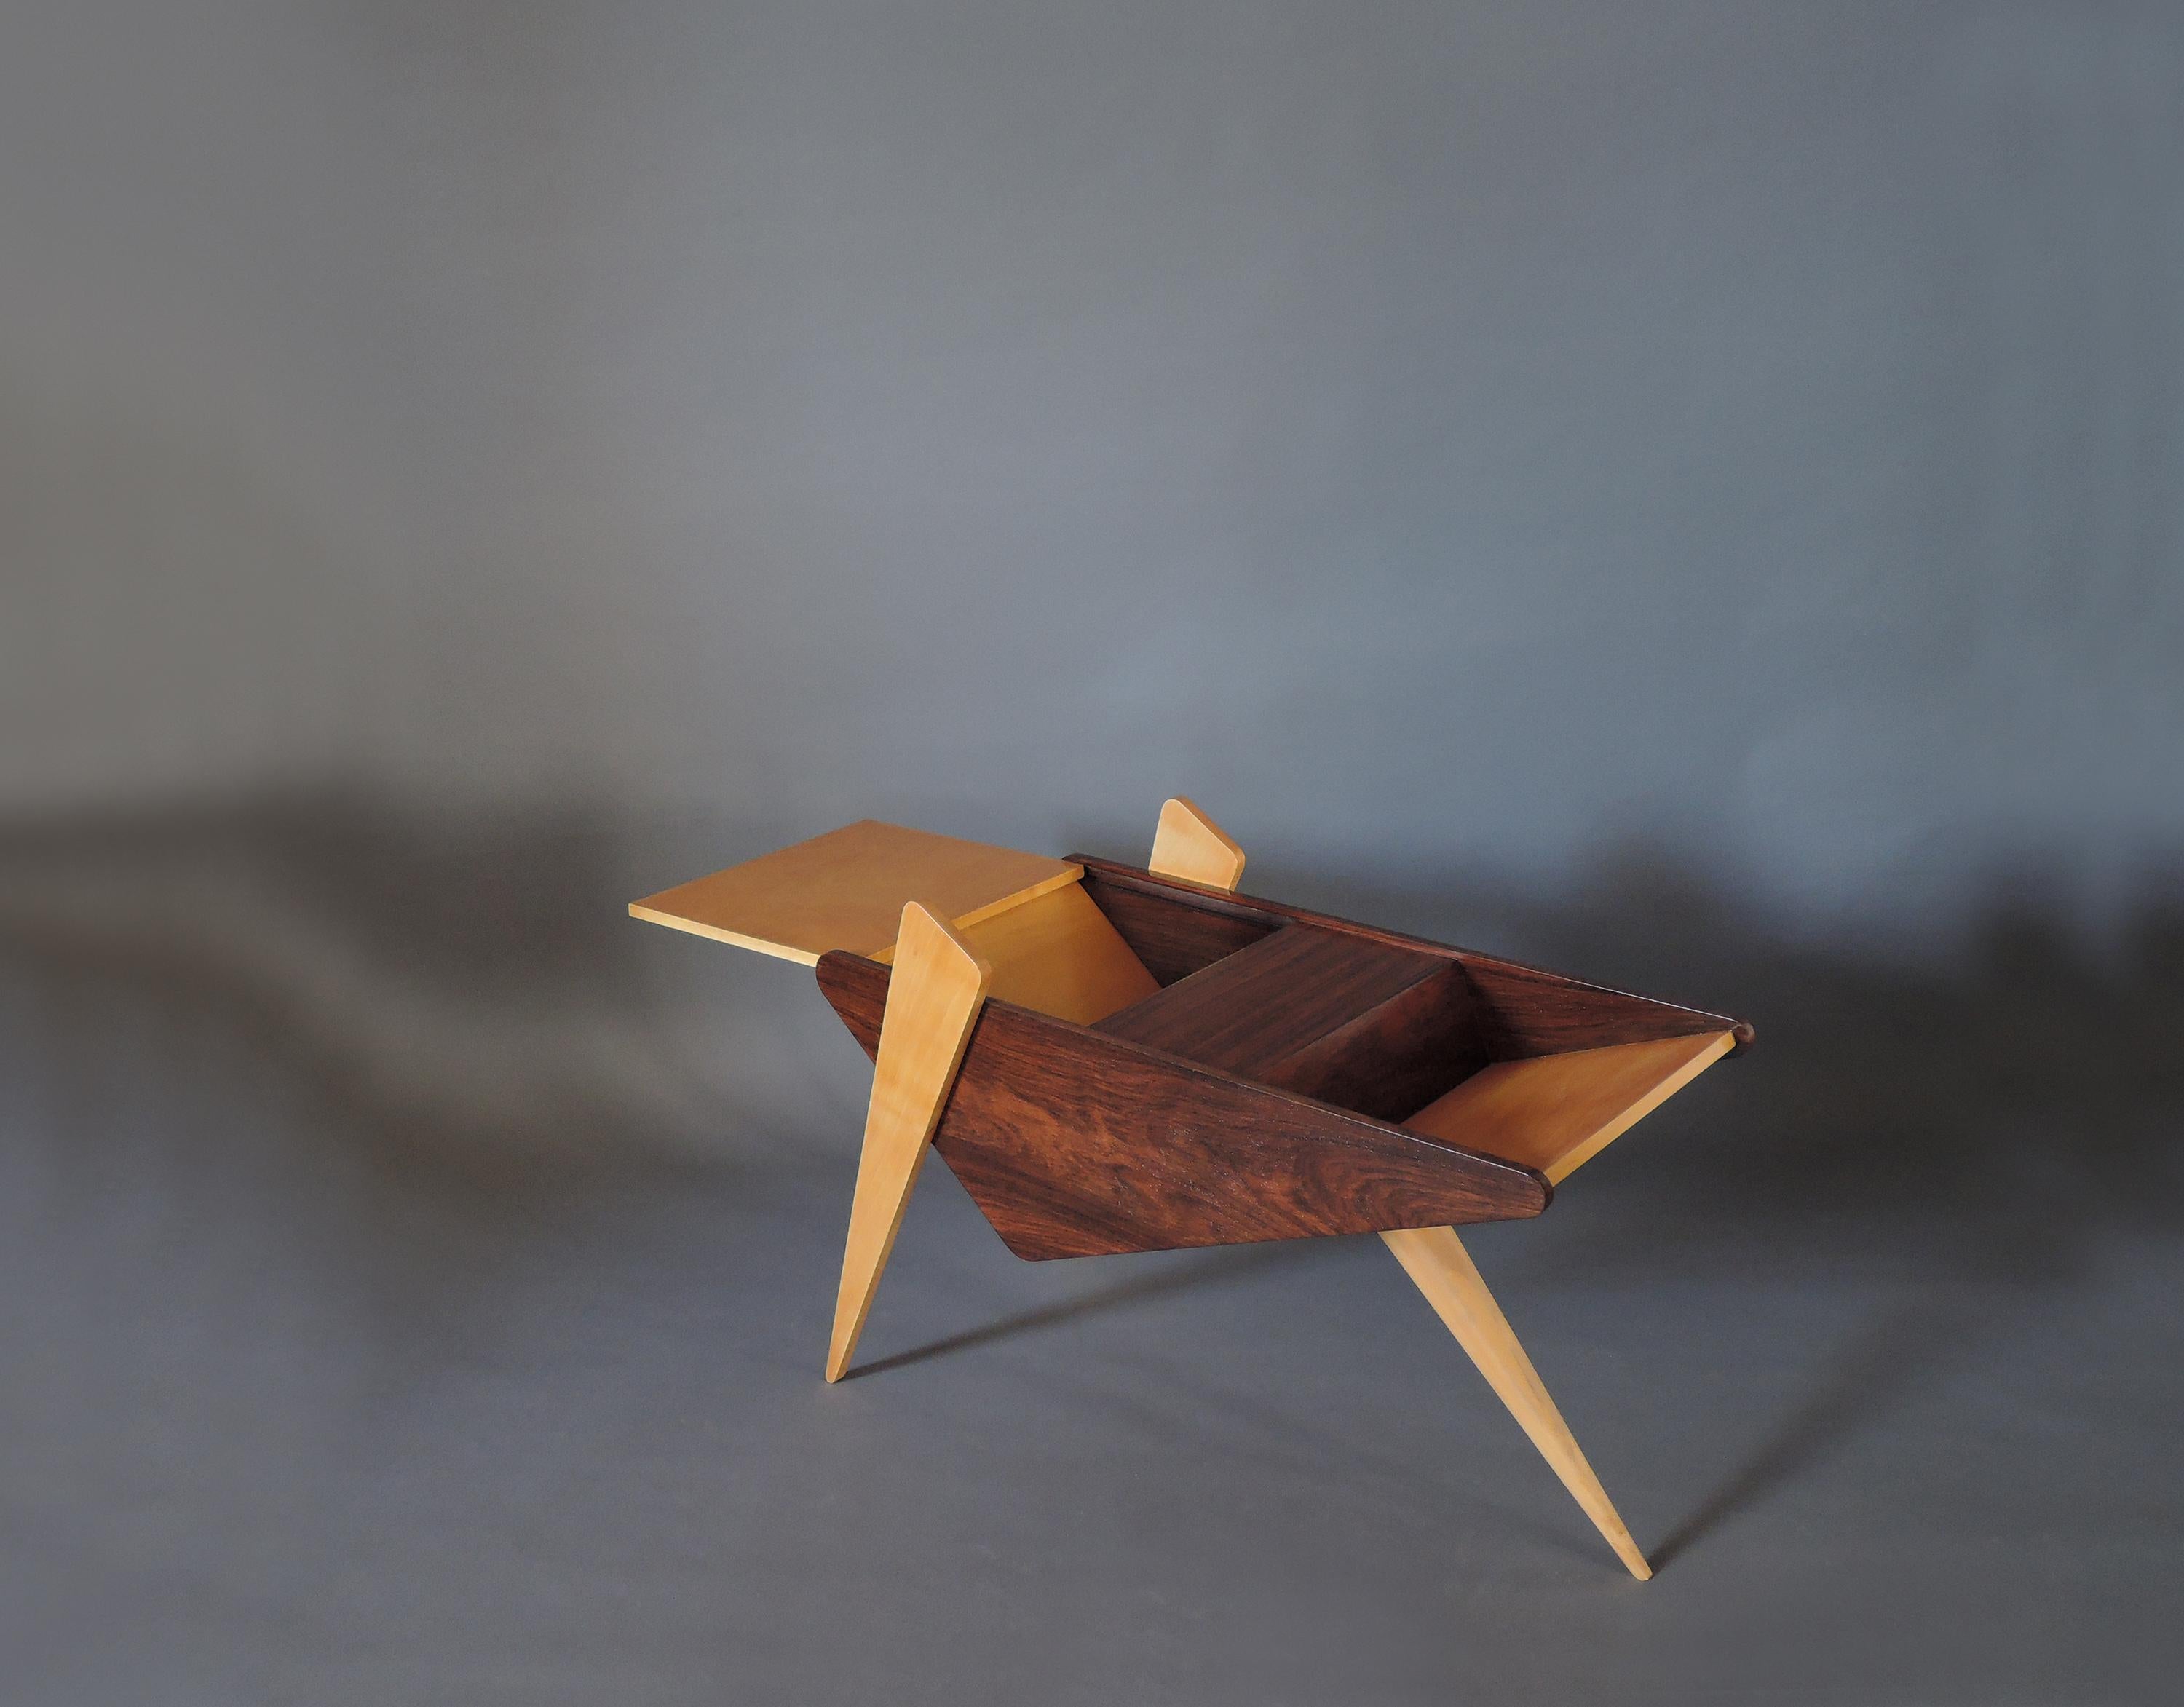 Unusual French mid-century rosewood and sycamore tripod side table / magazine rack with a partial sliding top.